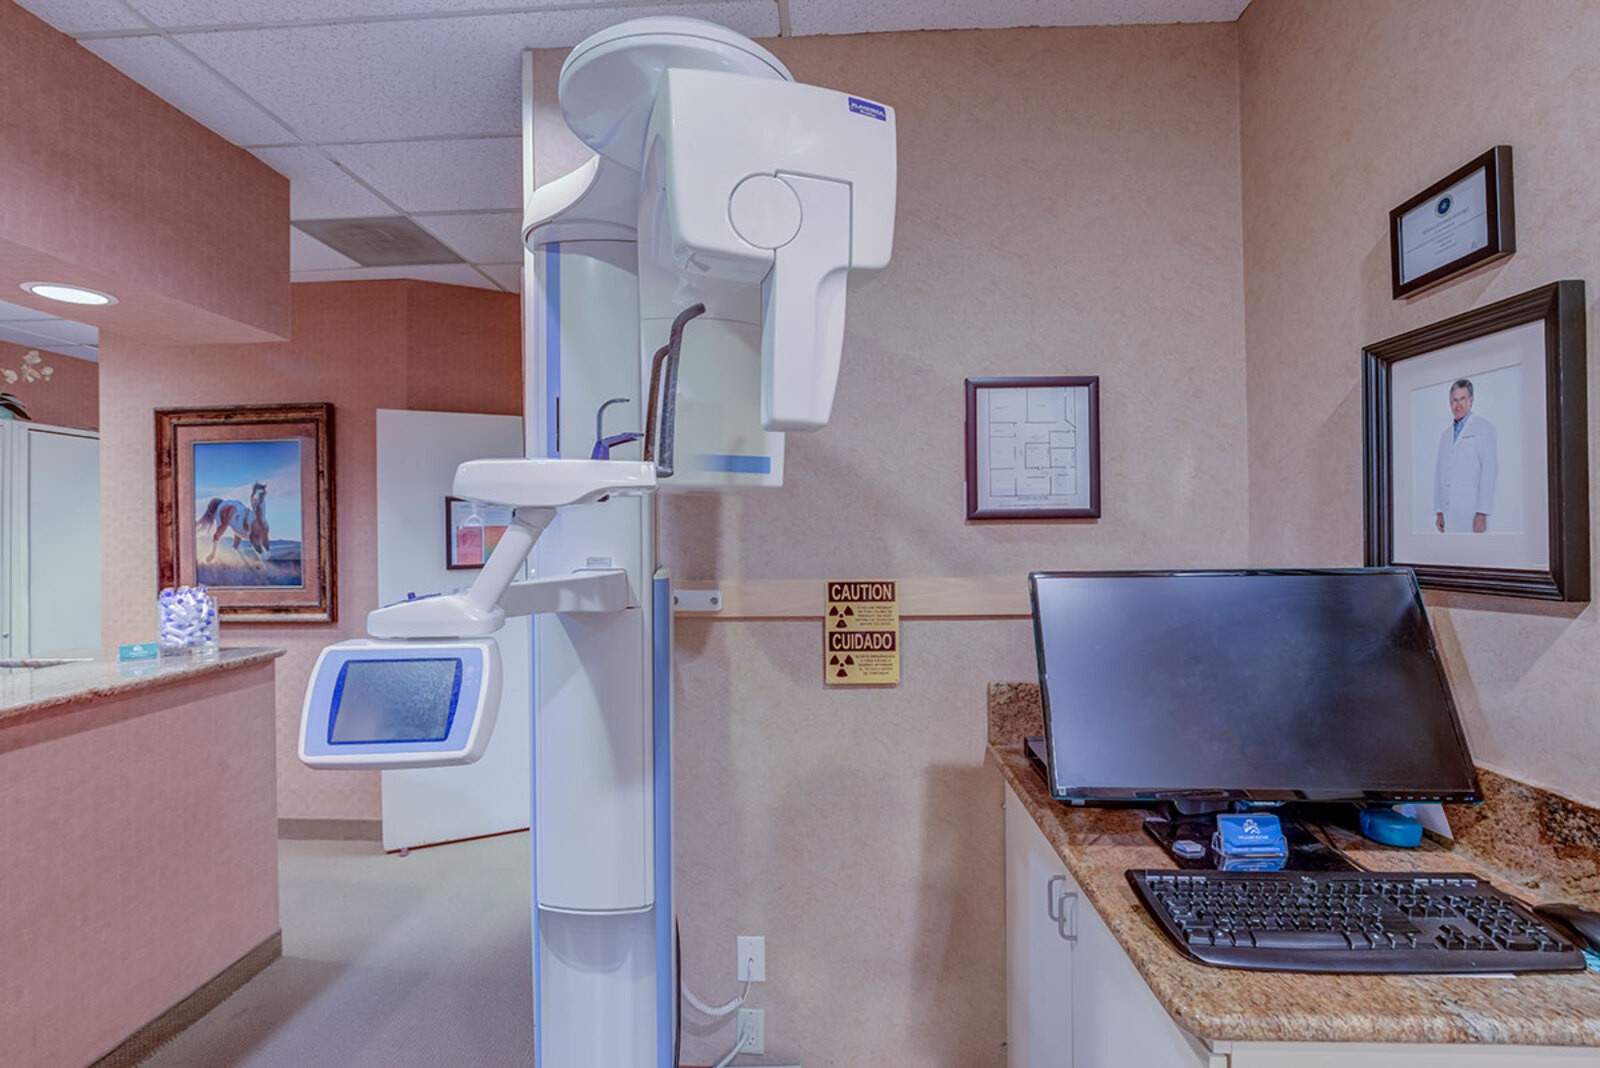 We use modern technology including digital x-rays for comfortable and efficient treatment